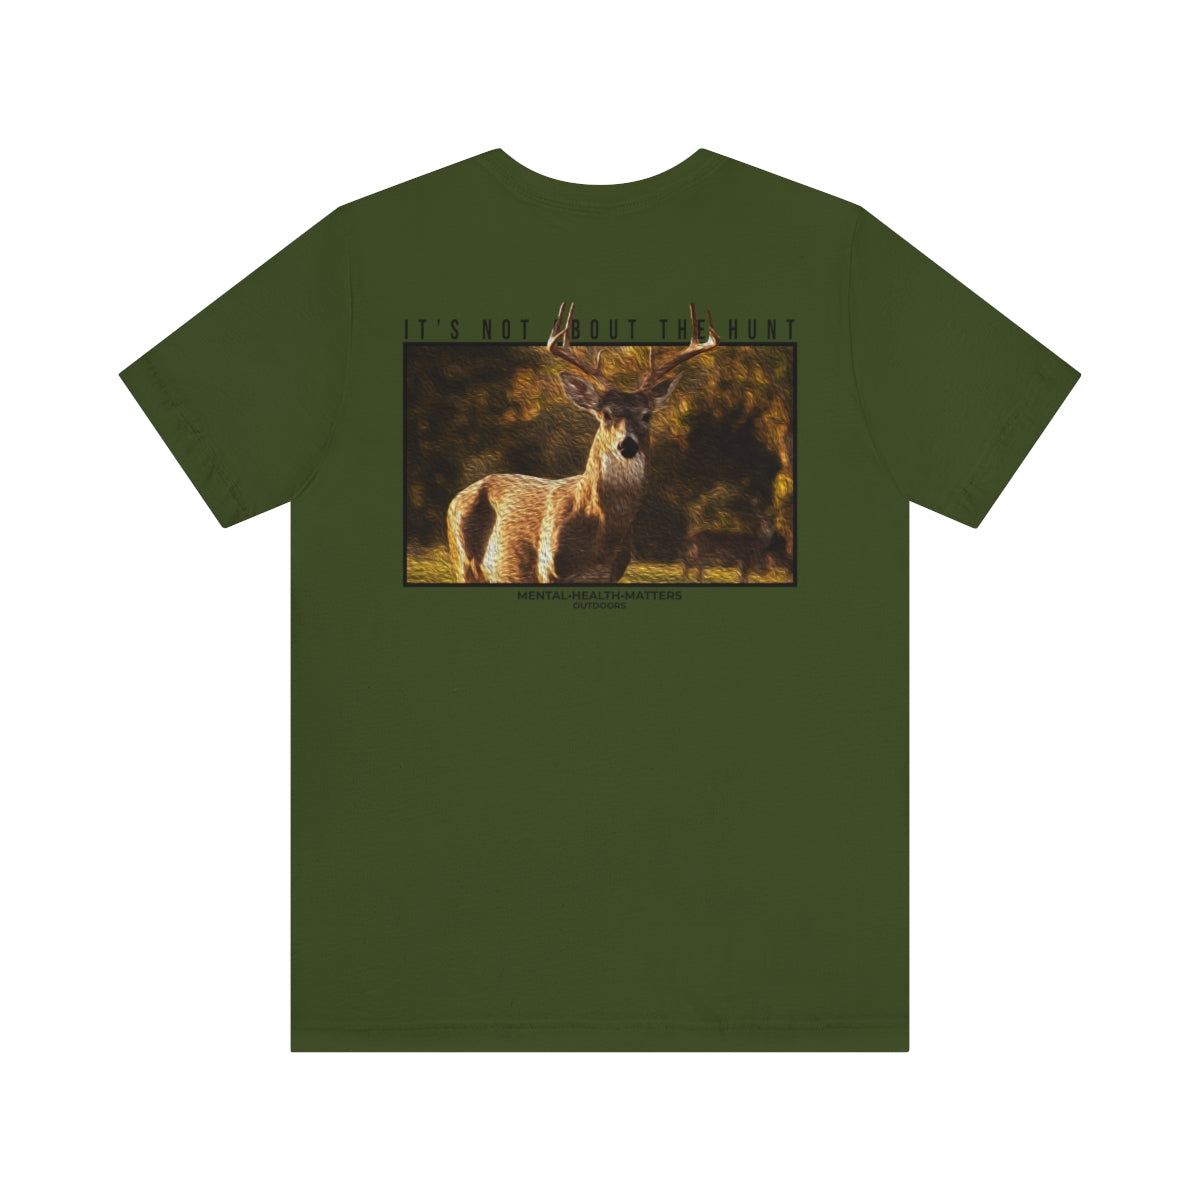 It's not about the hunt (Deer)(4 Colors Available)